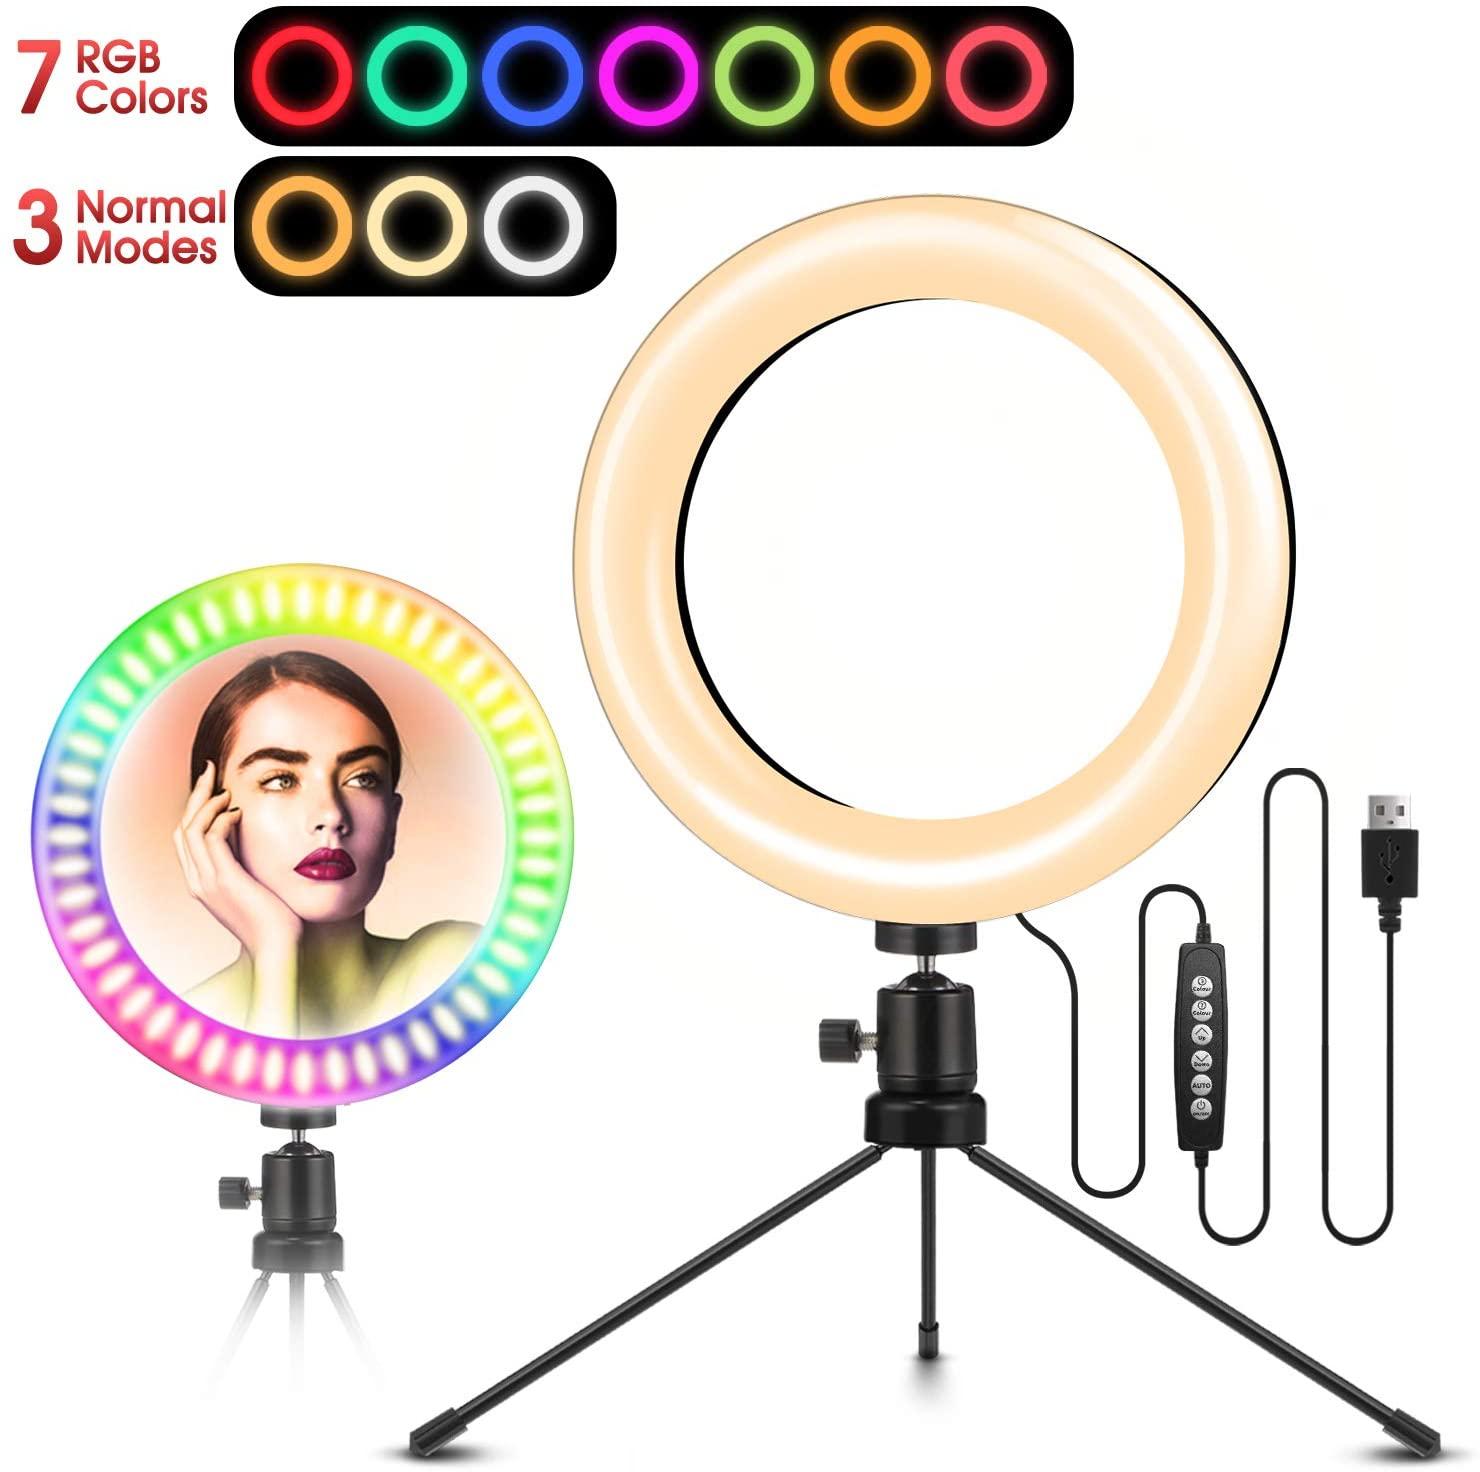 8in Elegiant Selfie Ring Light with Tripod Stand for $10.56